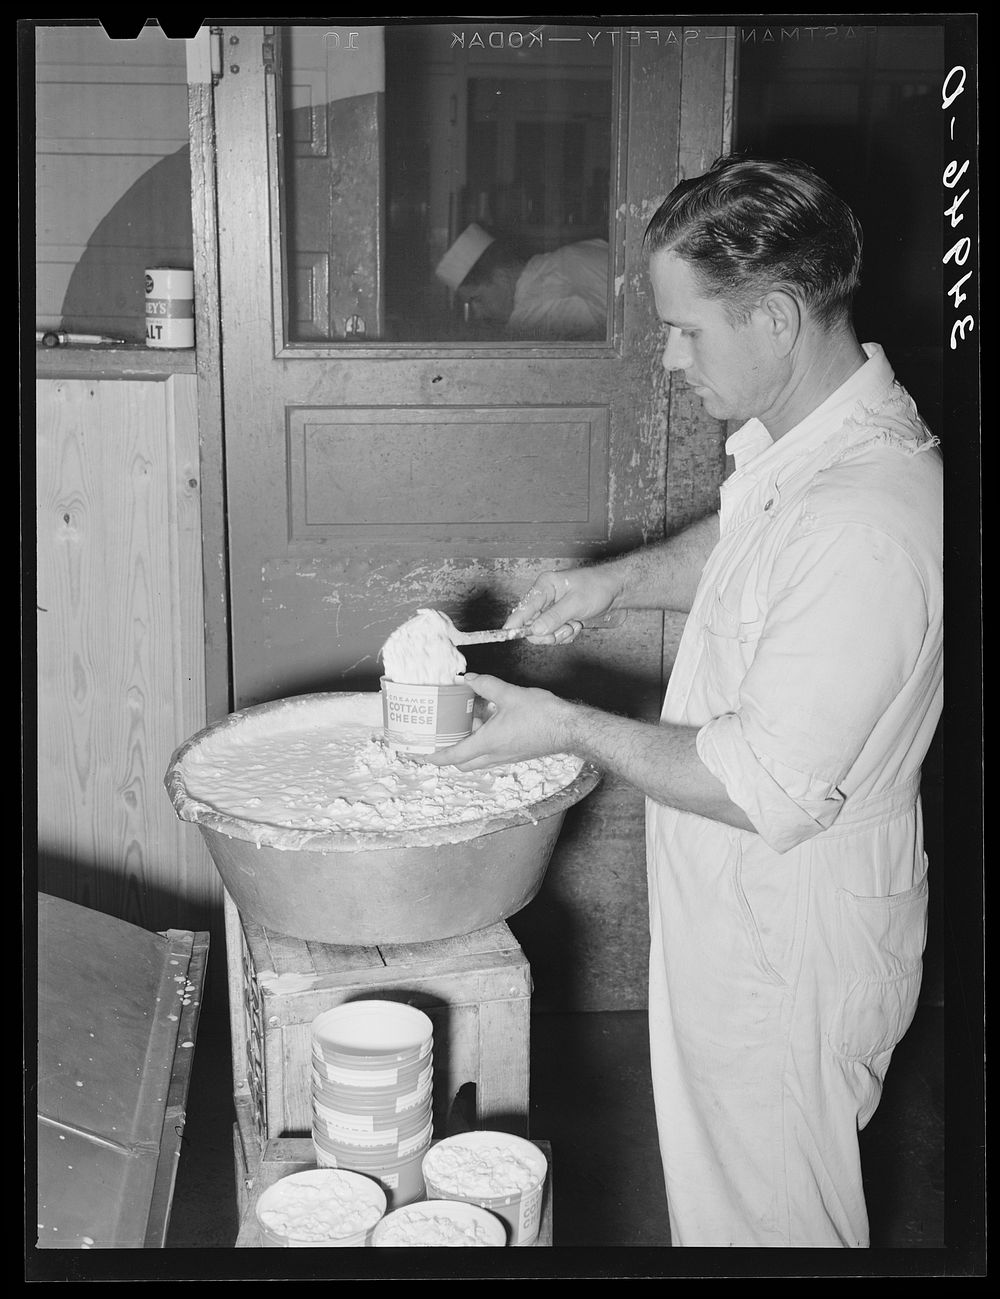 Filling cartons with cottage cheese. Creamery, San Angelo, Texas by Russell Lee